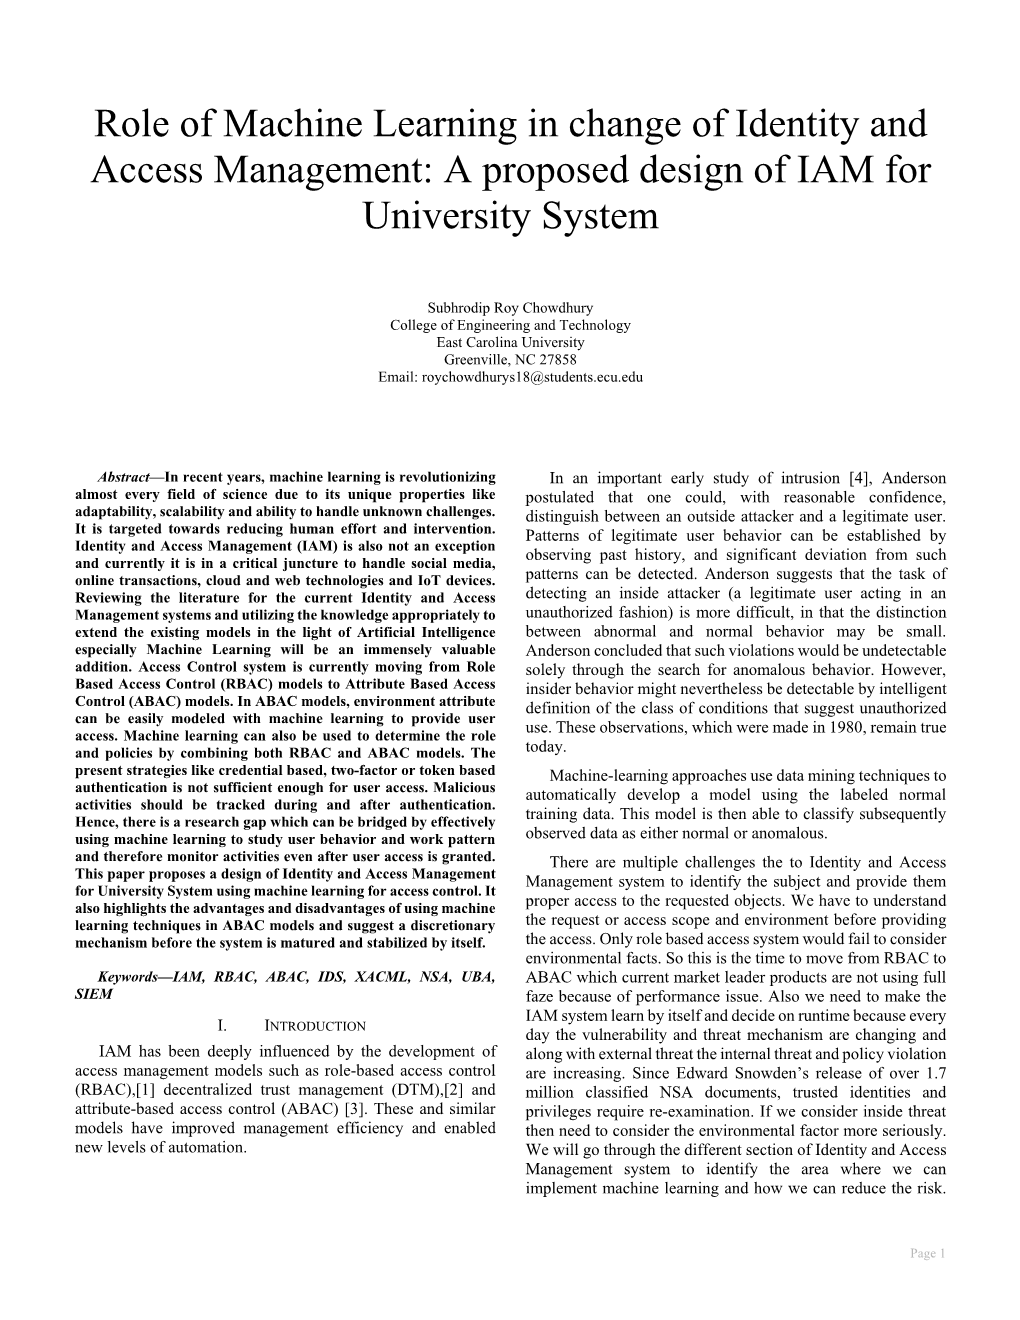 Role of Machine Learning in Change of Identity and Access Management: a Proposed Design of IAM for University System